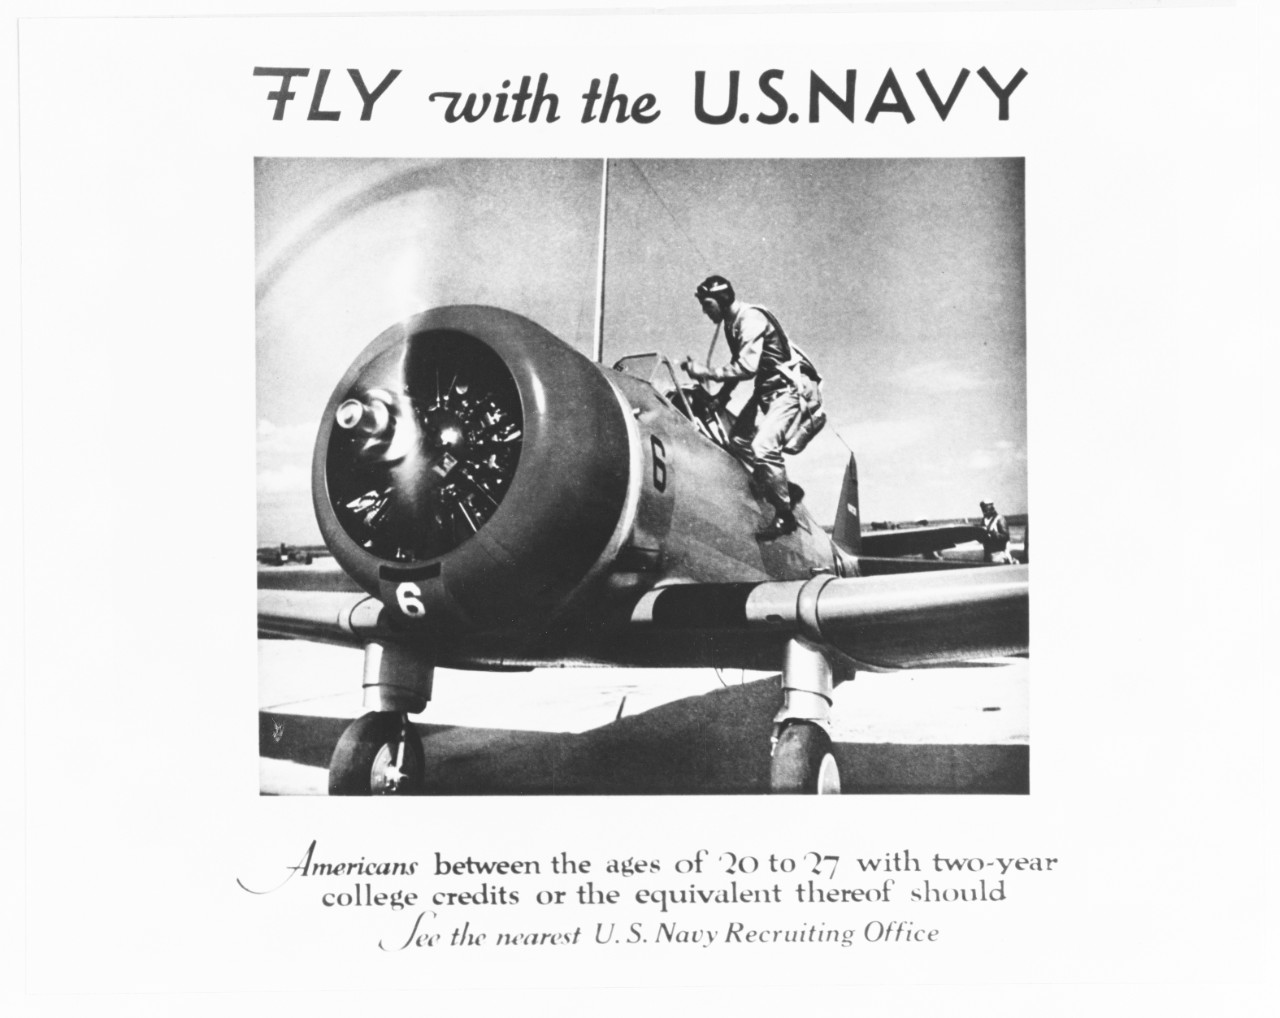 Navy poster, "Fly with the U.S. Navy"